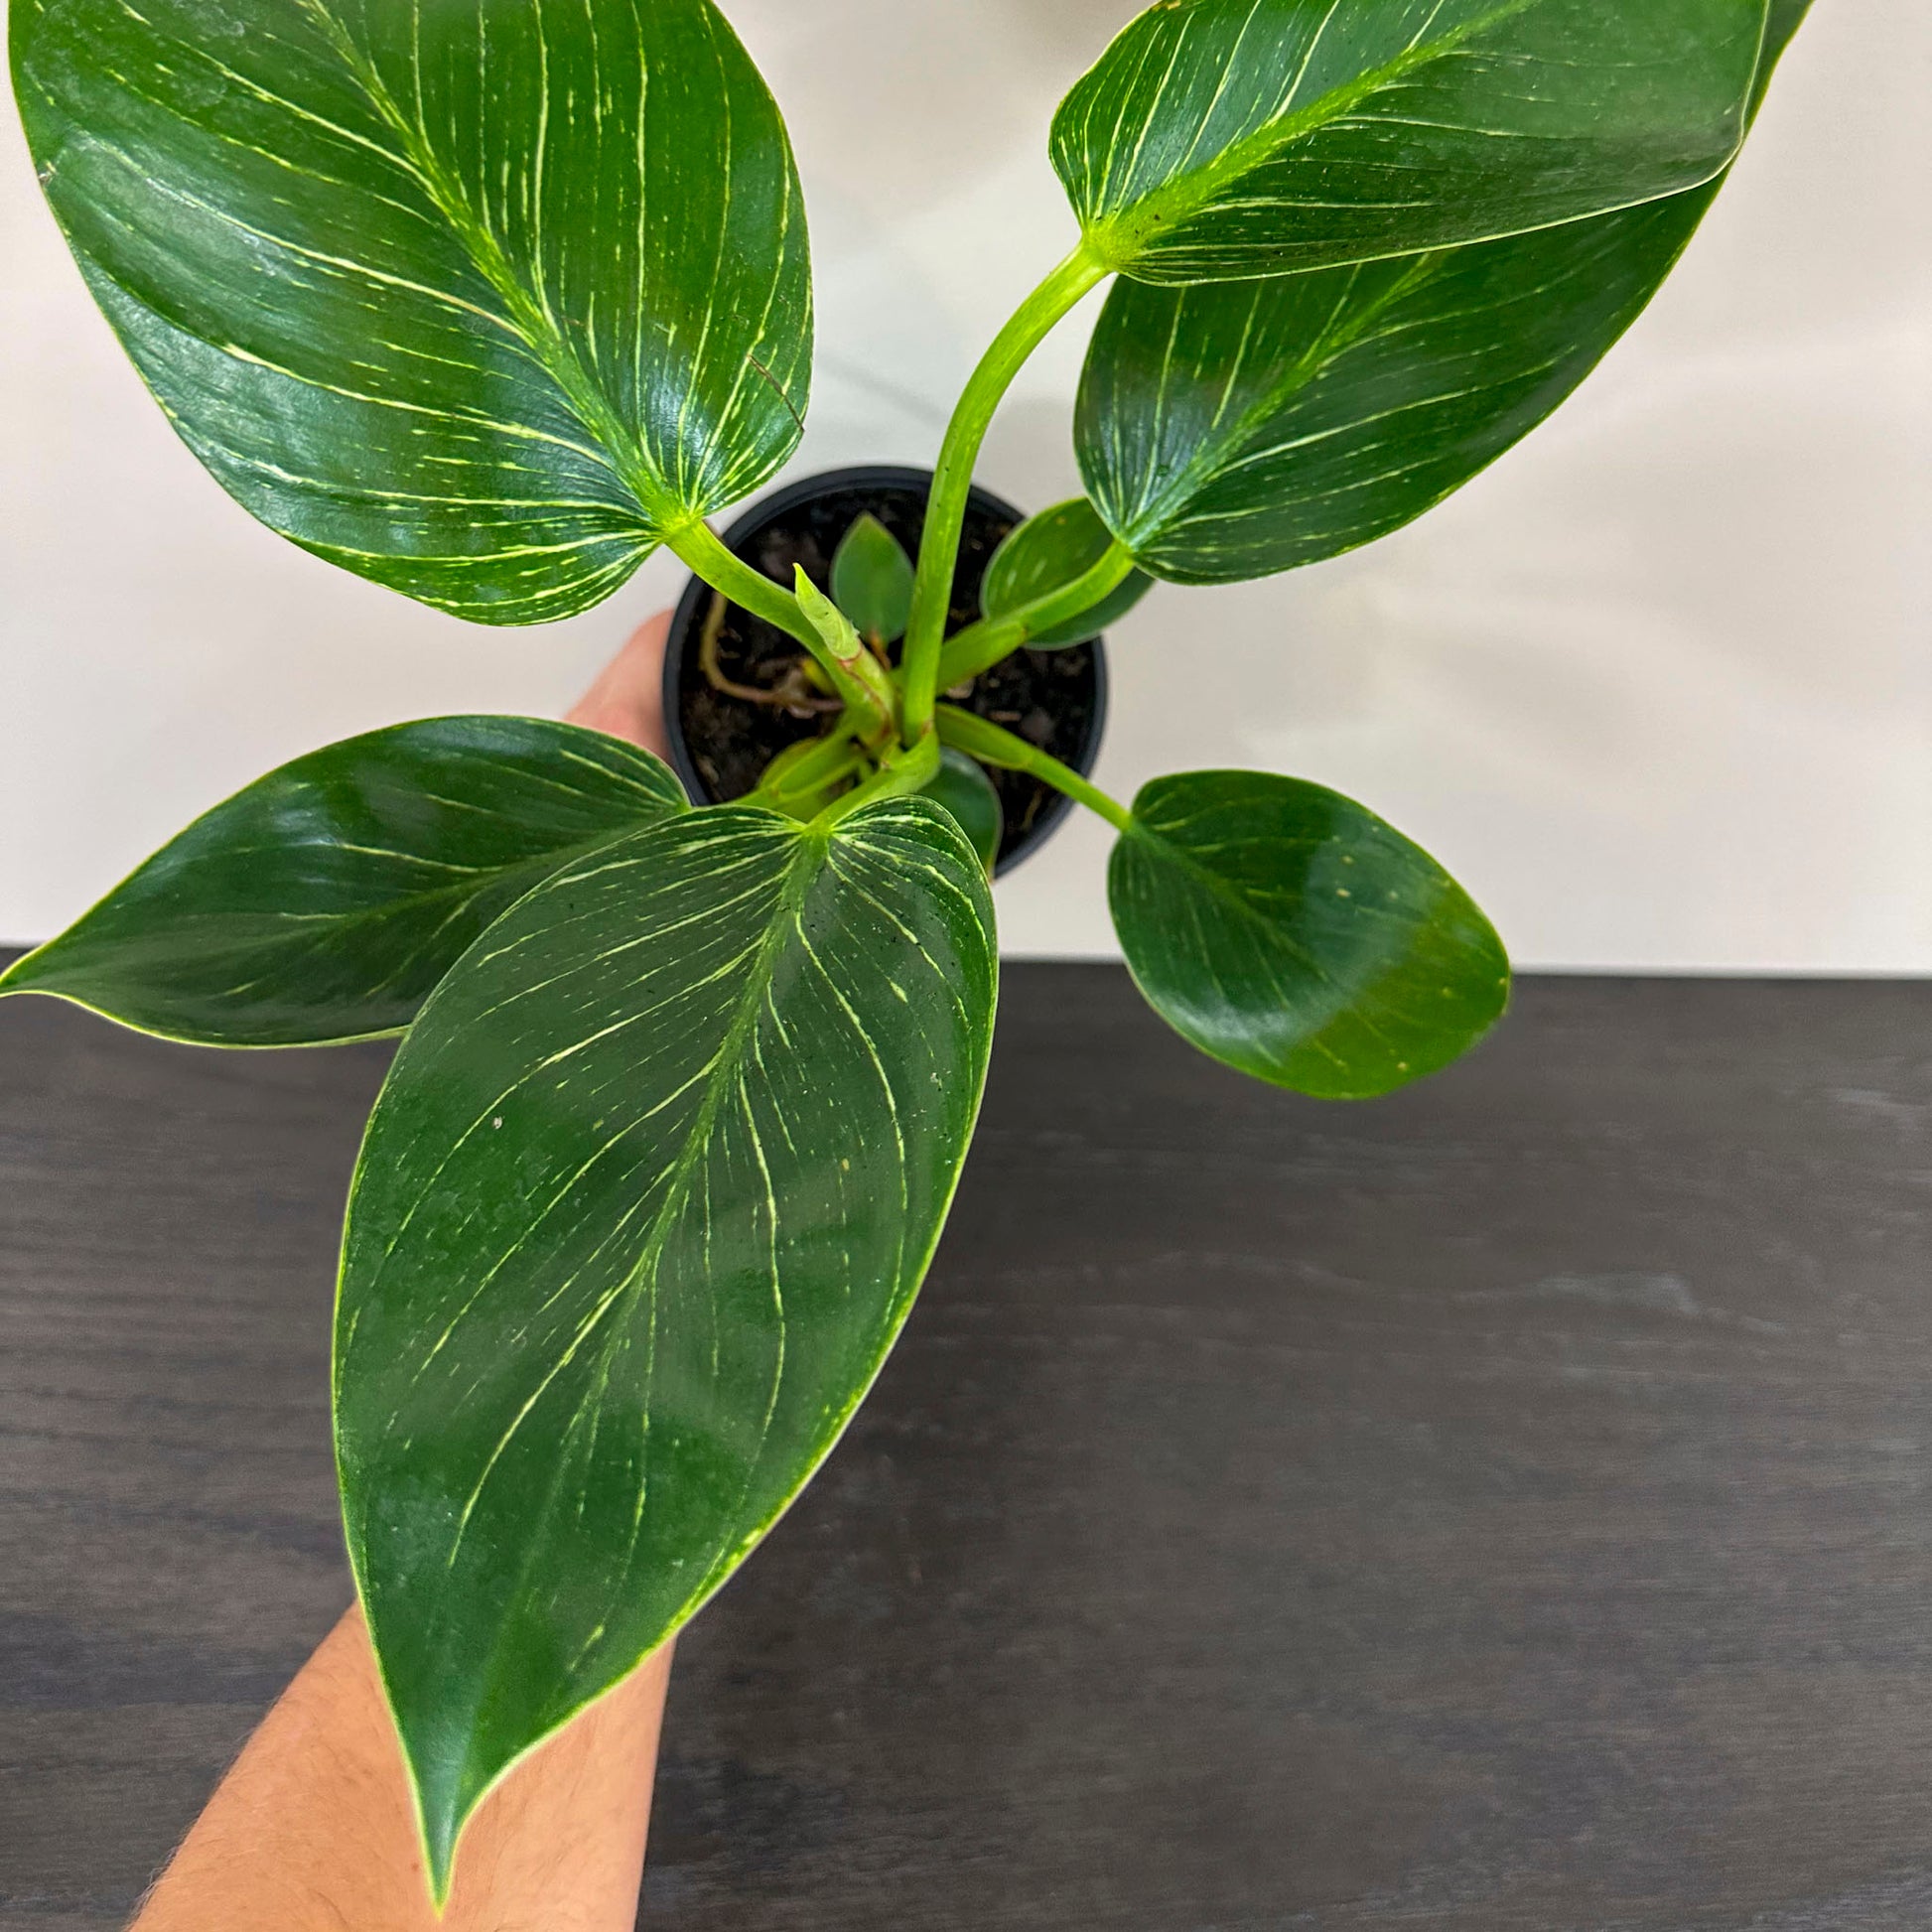 Philodendron 'Birkin' - A stylish houseplant with stunning variegated leaves.